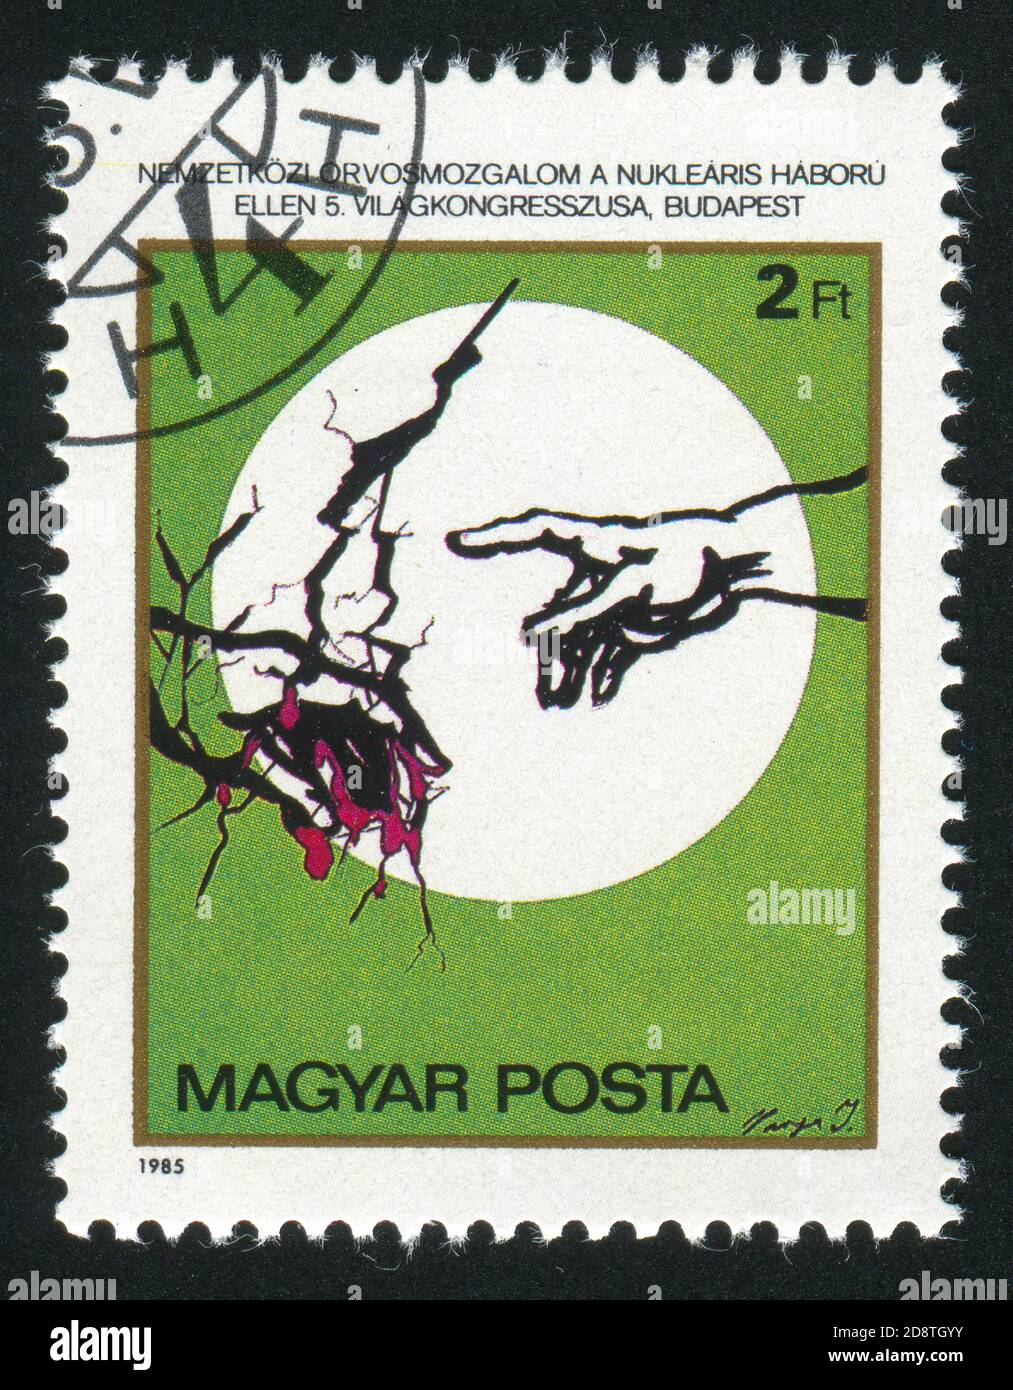 HUNGARY - CIRCA 1985: stamp printed by Hungary, shows Illustration of a Damaged Globe and Hands by Imre Varga, circa 1985 Stock Photo